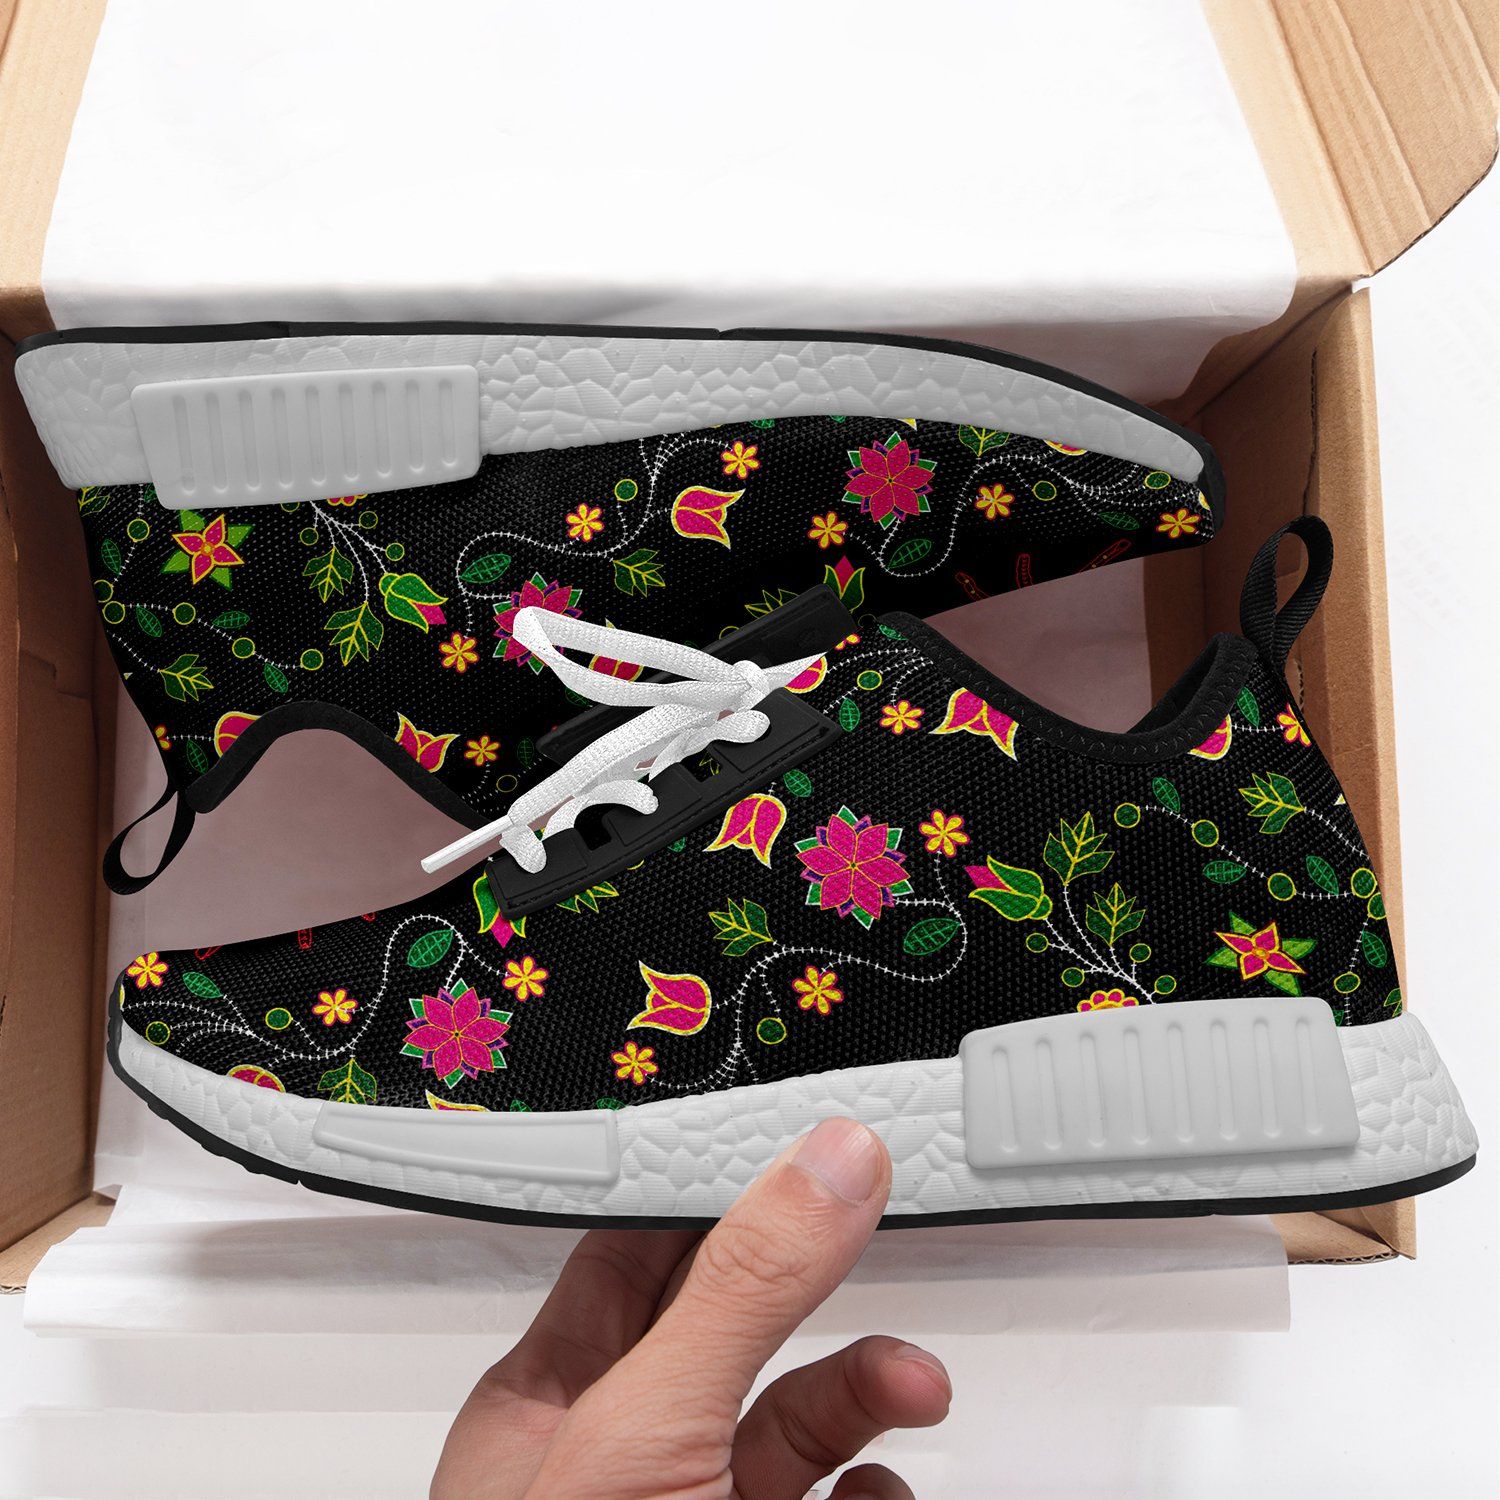 Floral Spider Draco Running Shoes 49 Dzine 